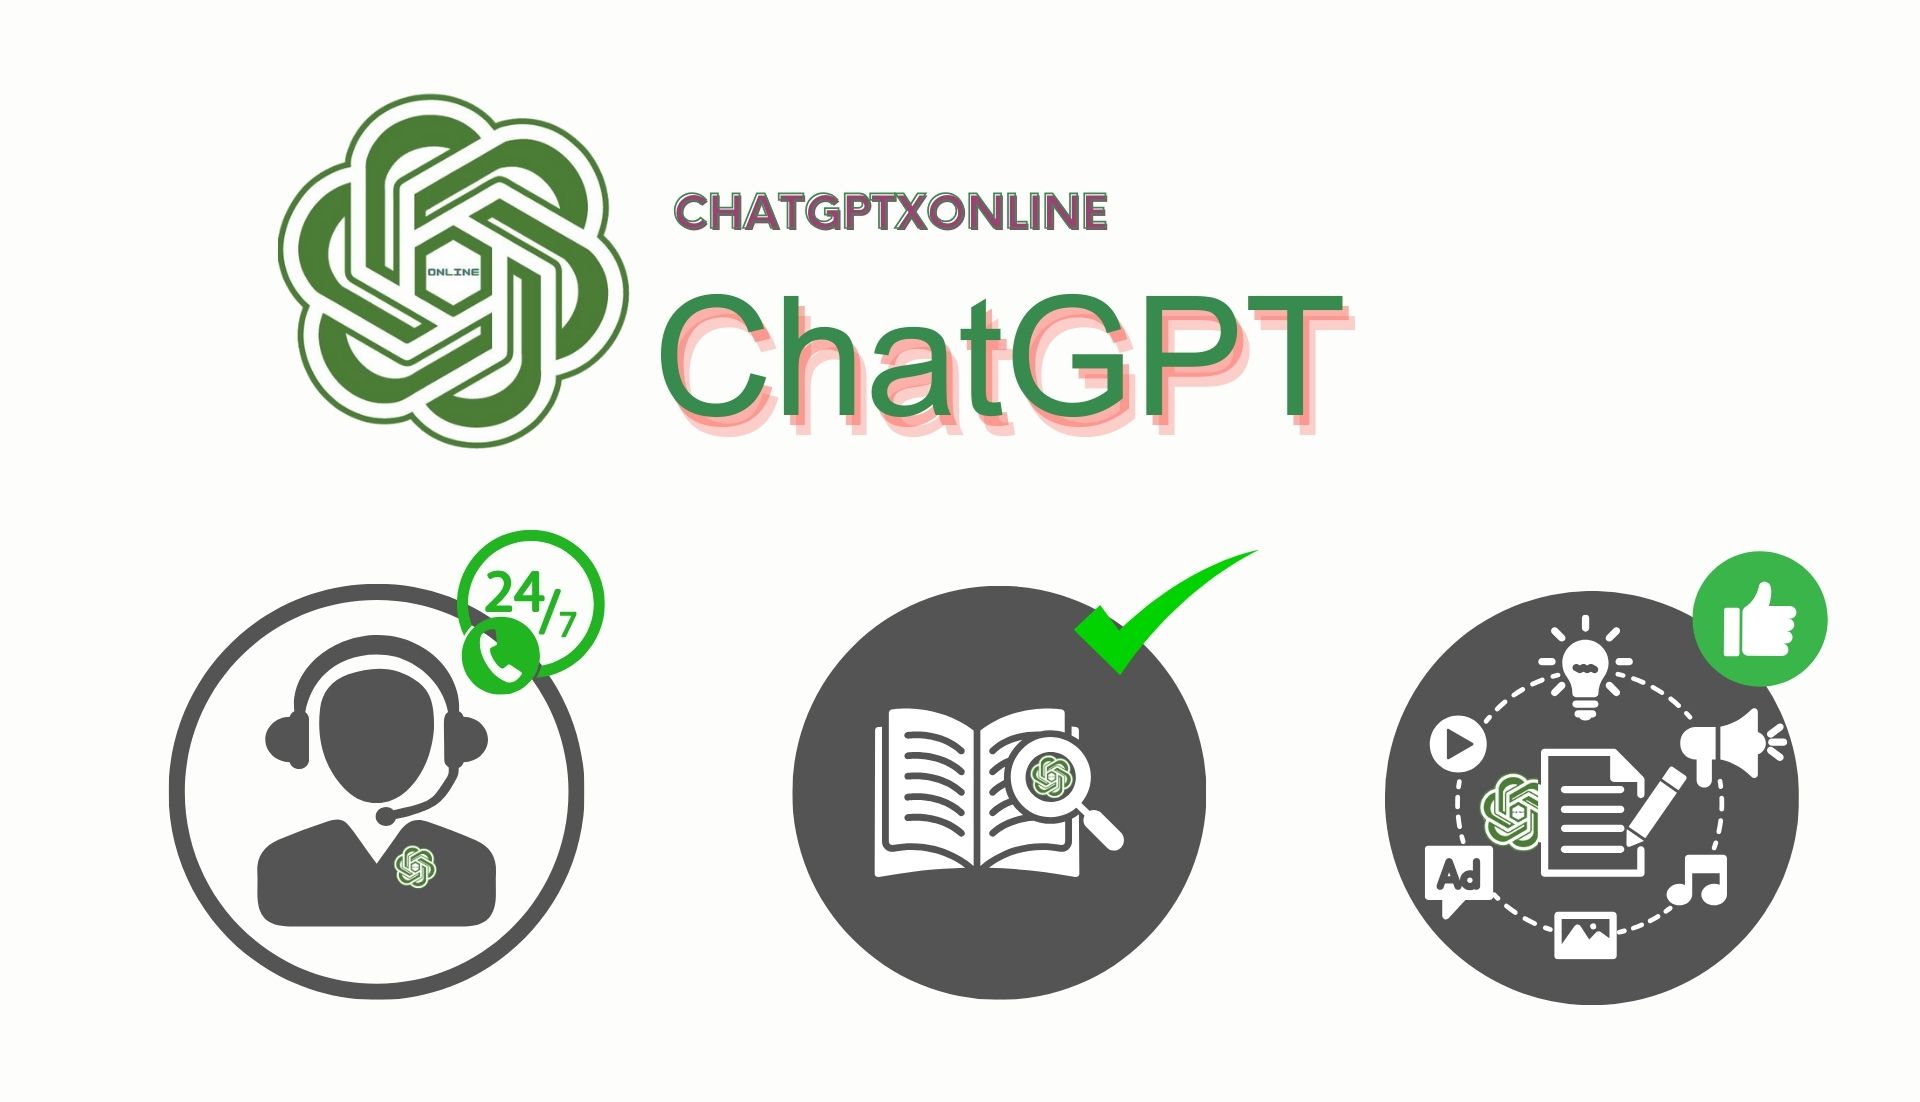 What ChatGPT can do